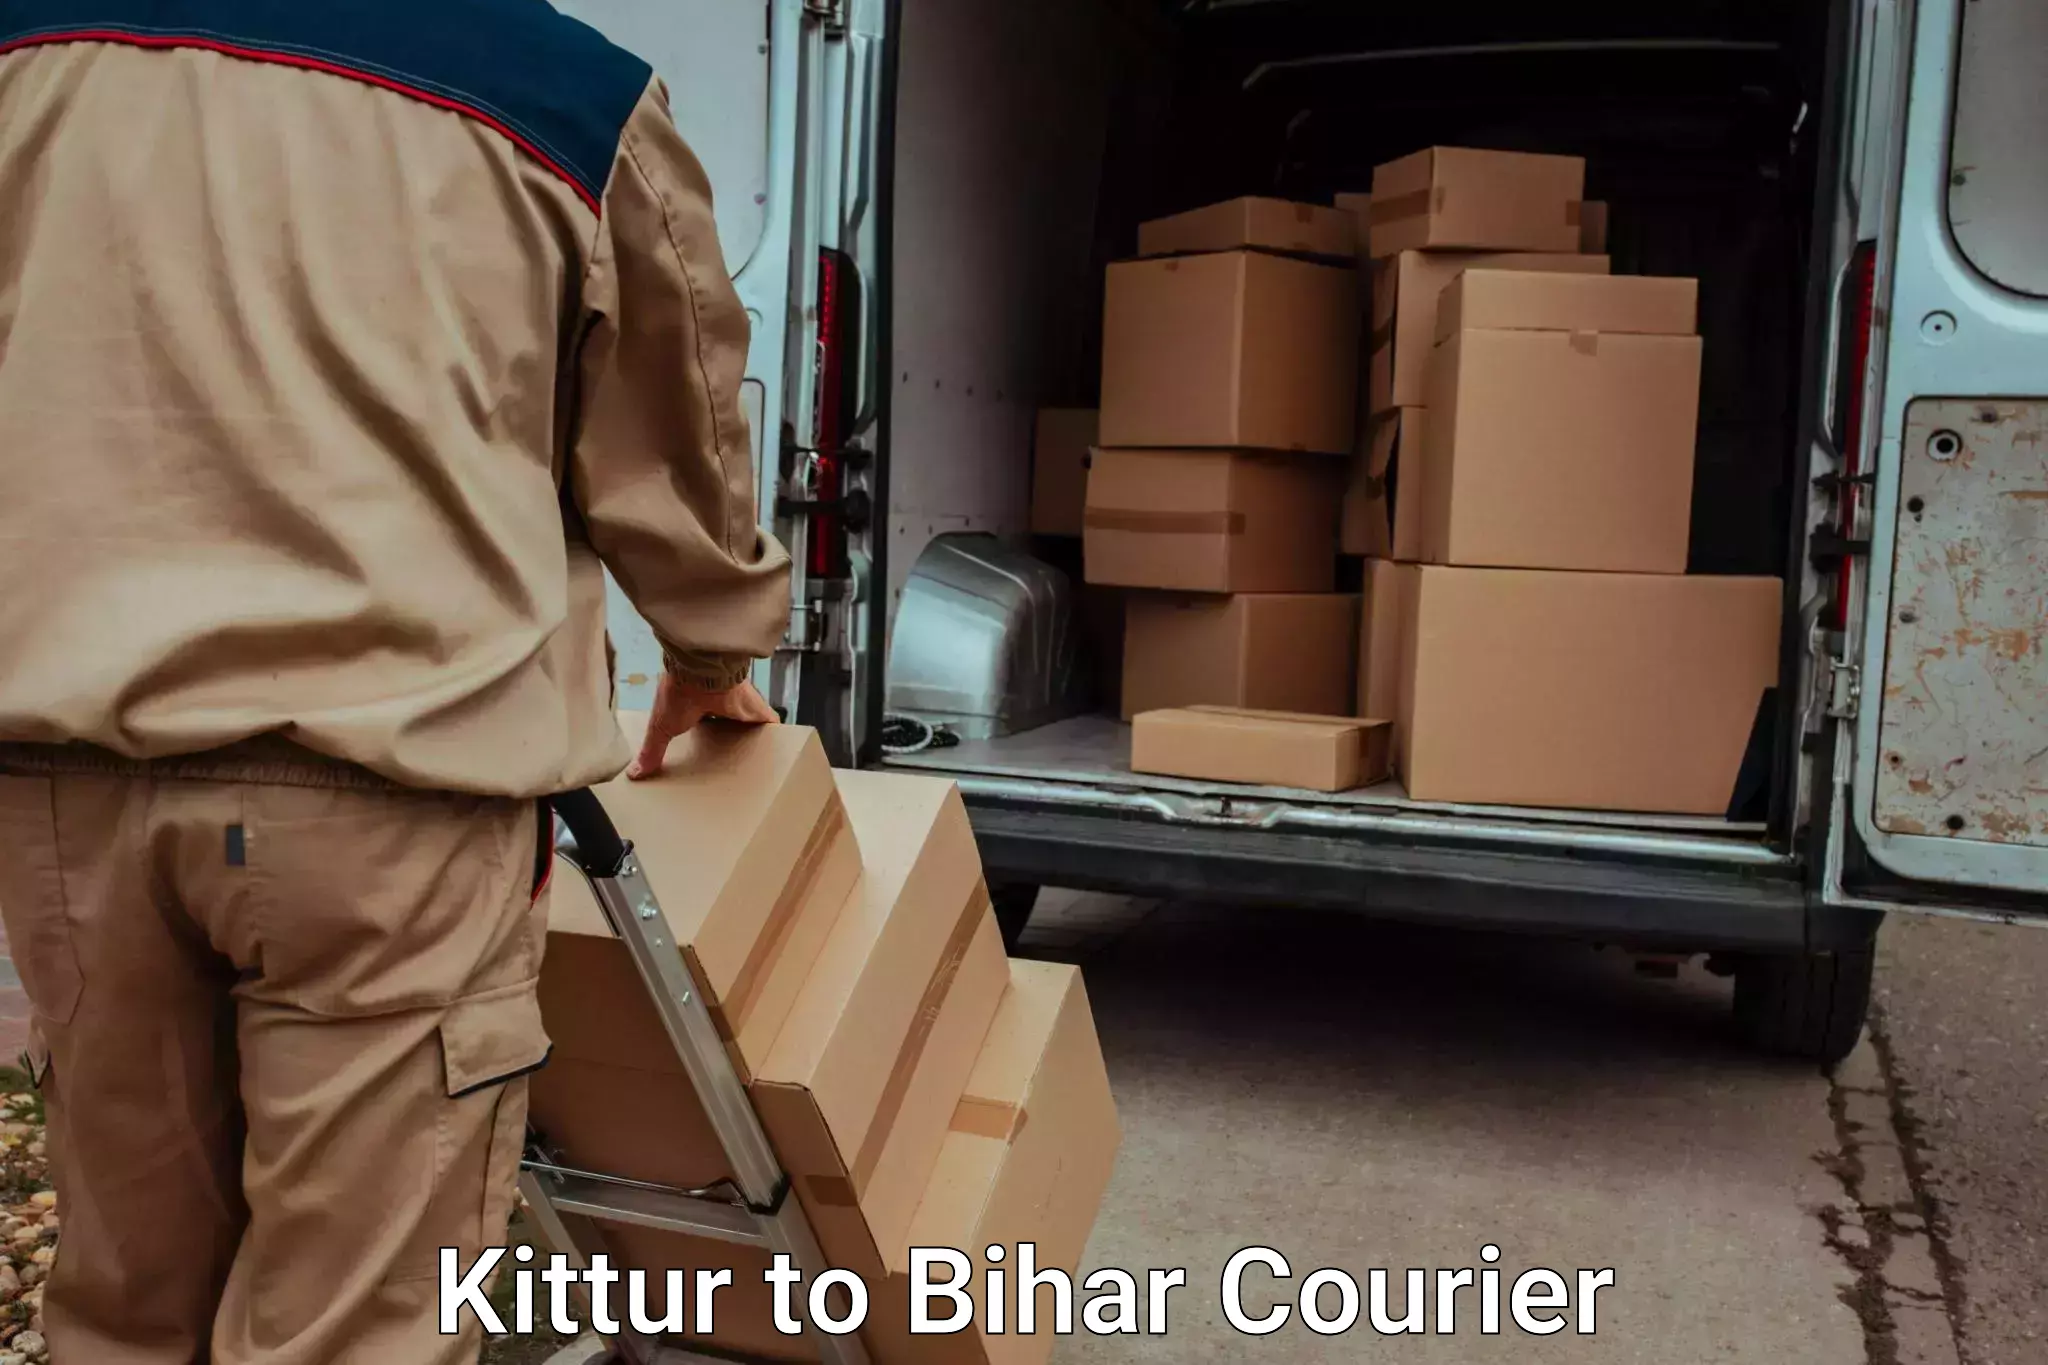 Instant baggage transport quote Kittur to Mairwa